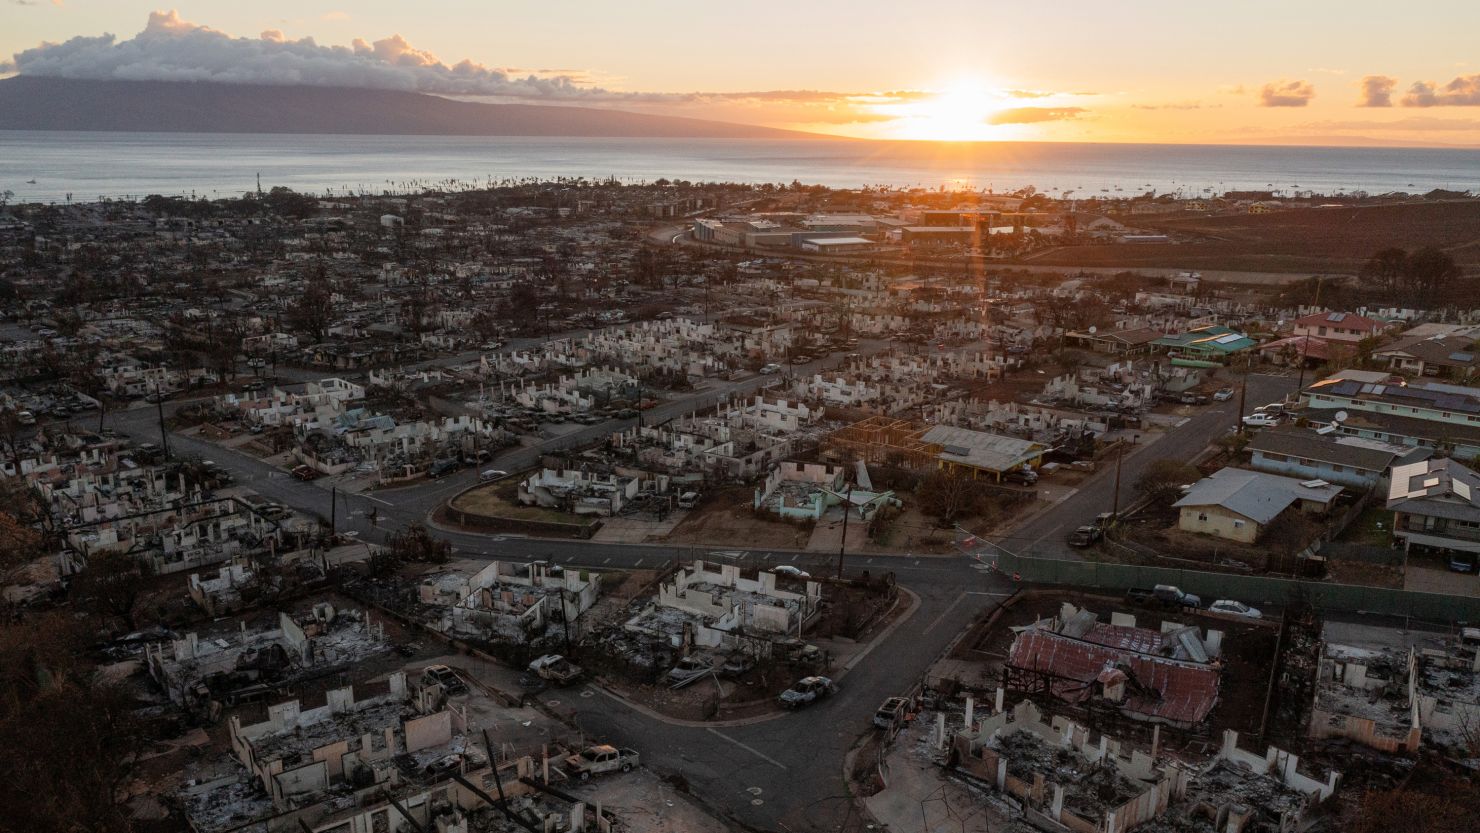 Burned homes and vehicles are seen in a neighborhood that was destroyed by windswept wildfires in Lahaina, Hawaii, on August 19.